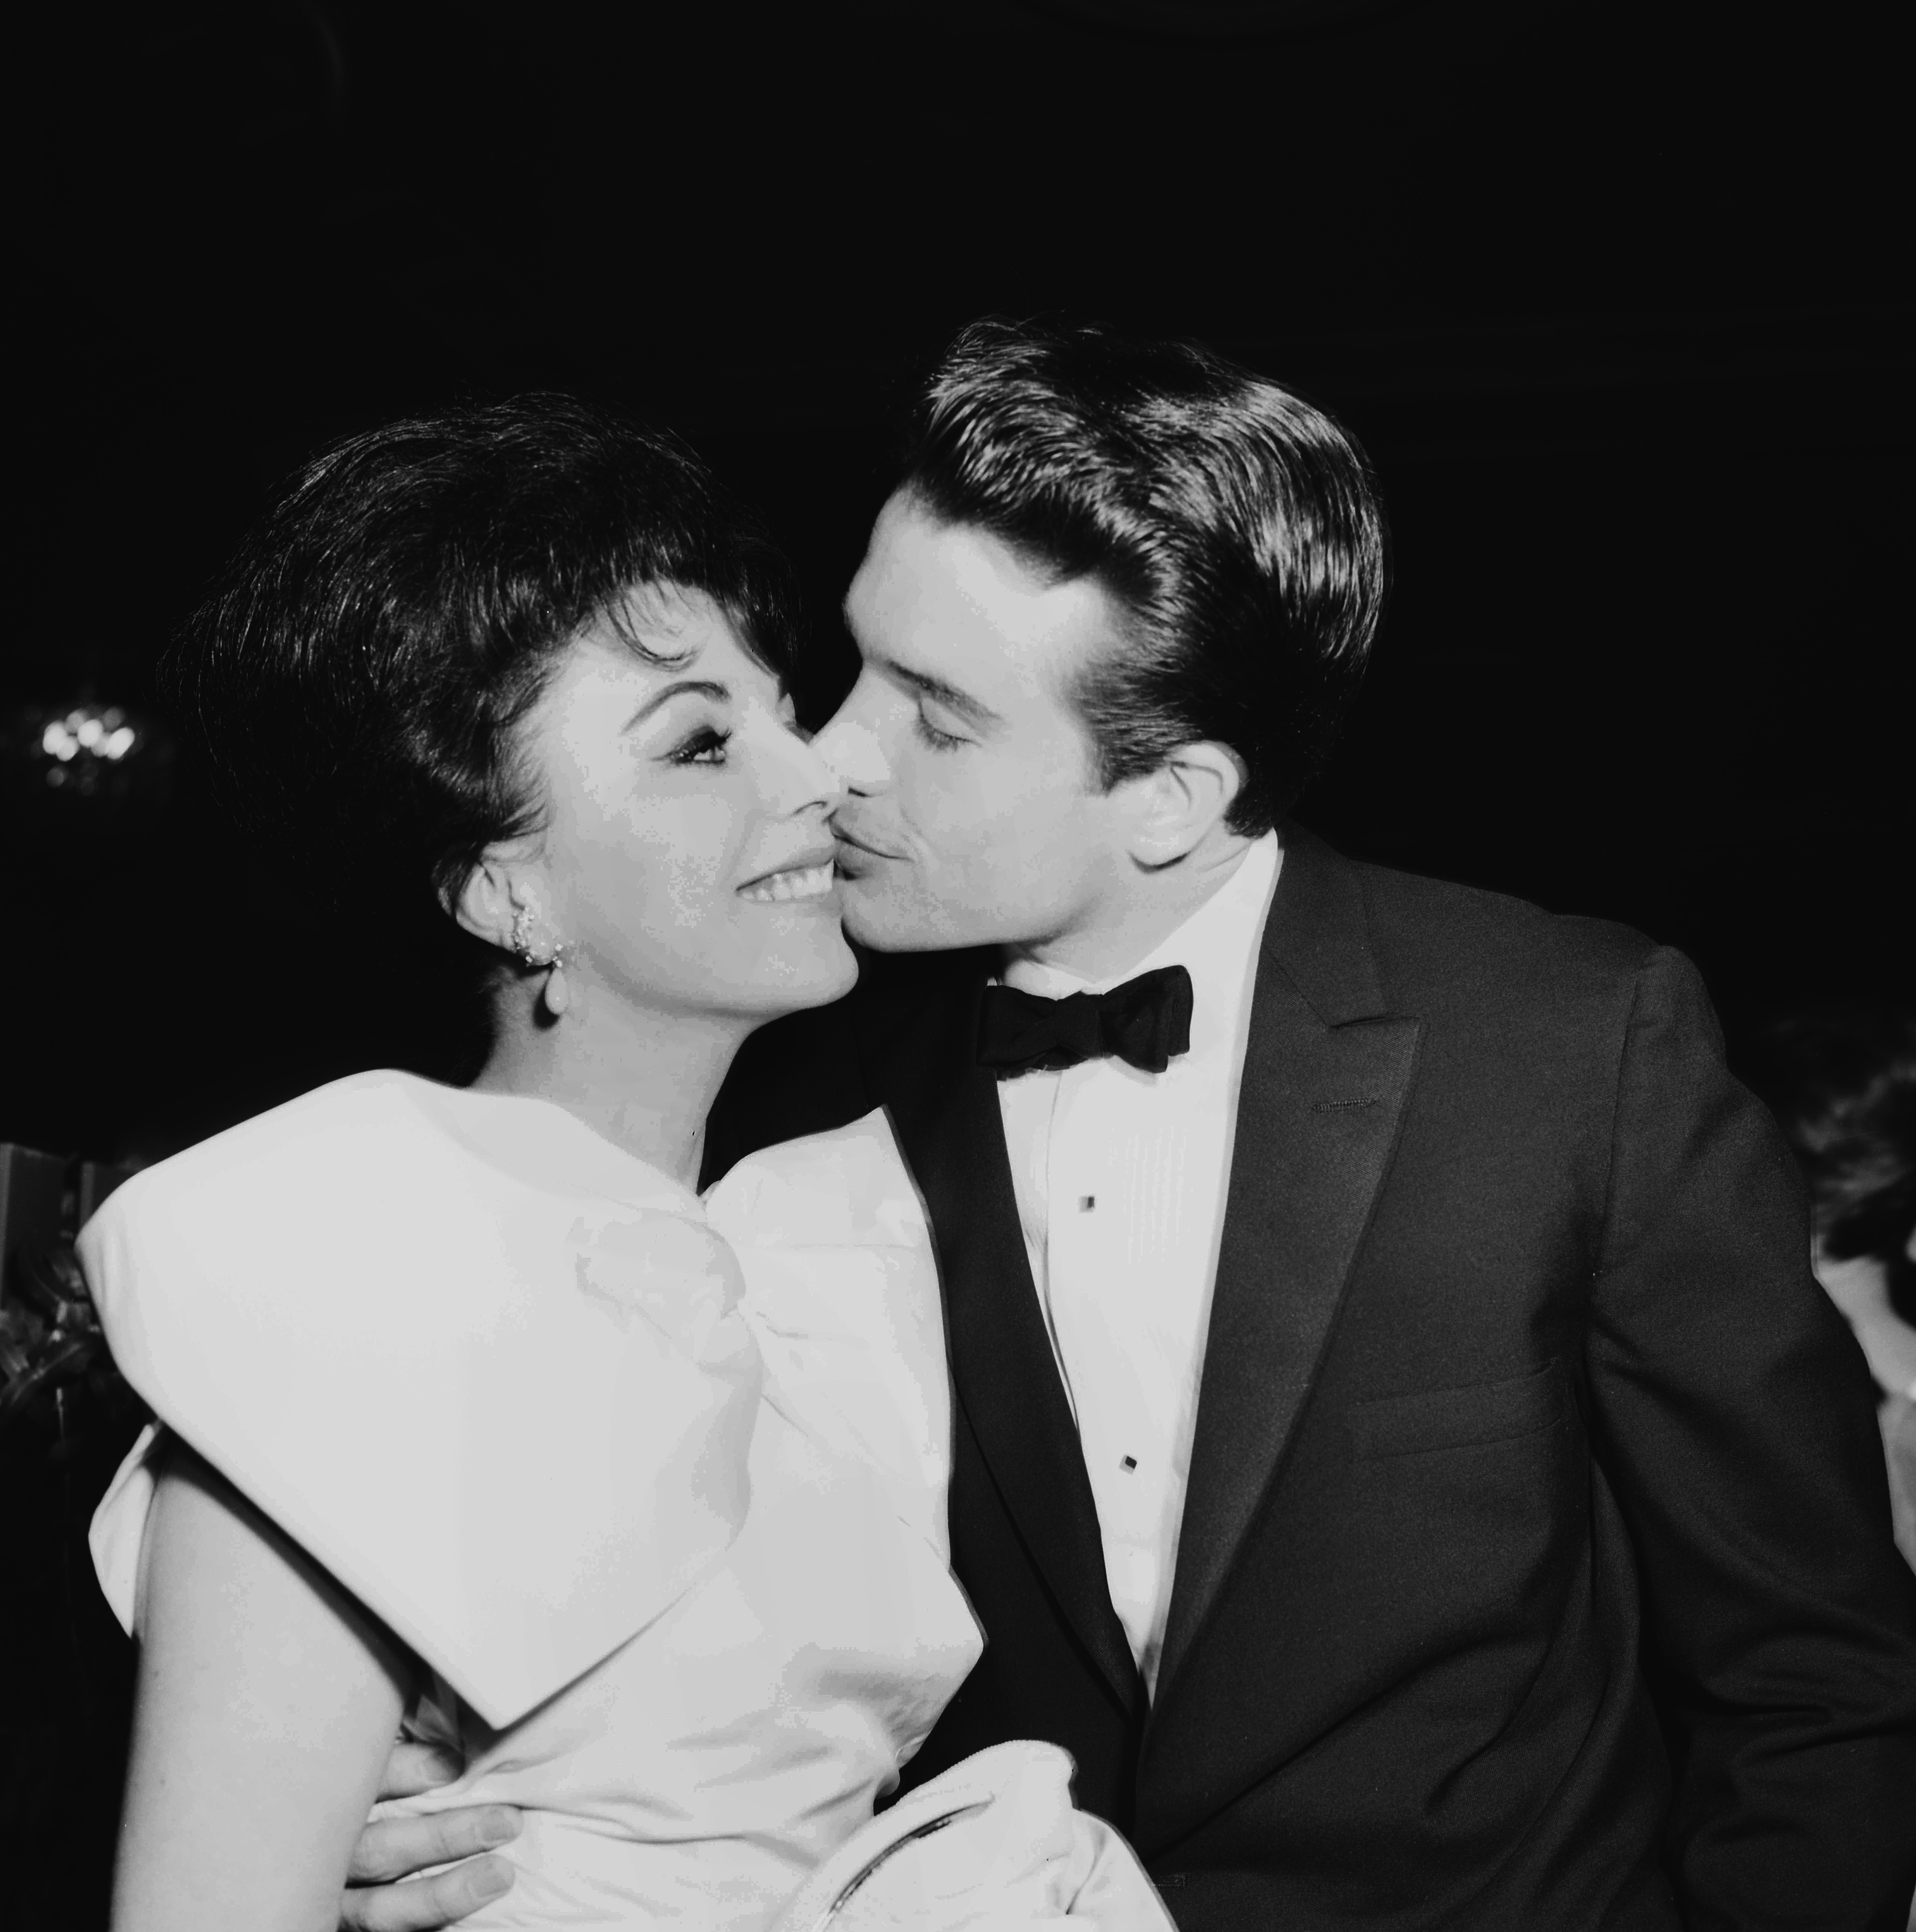 Warren Beatty kisses Joan Collins as they attend a party in Los Angeles, California in 1959. | Source: Getty Images